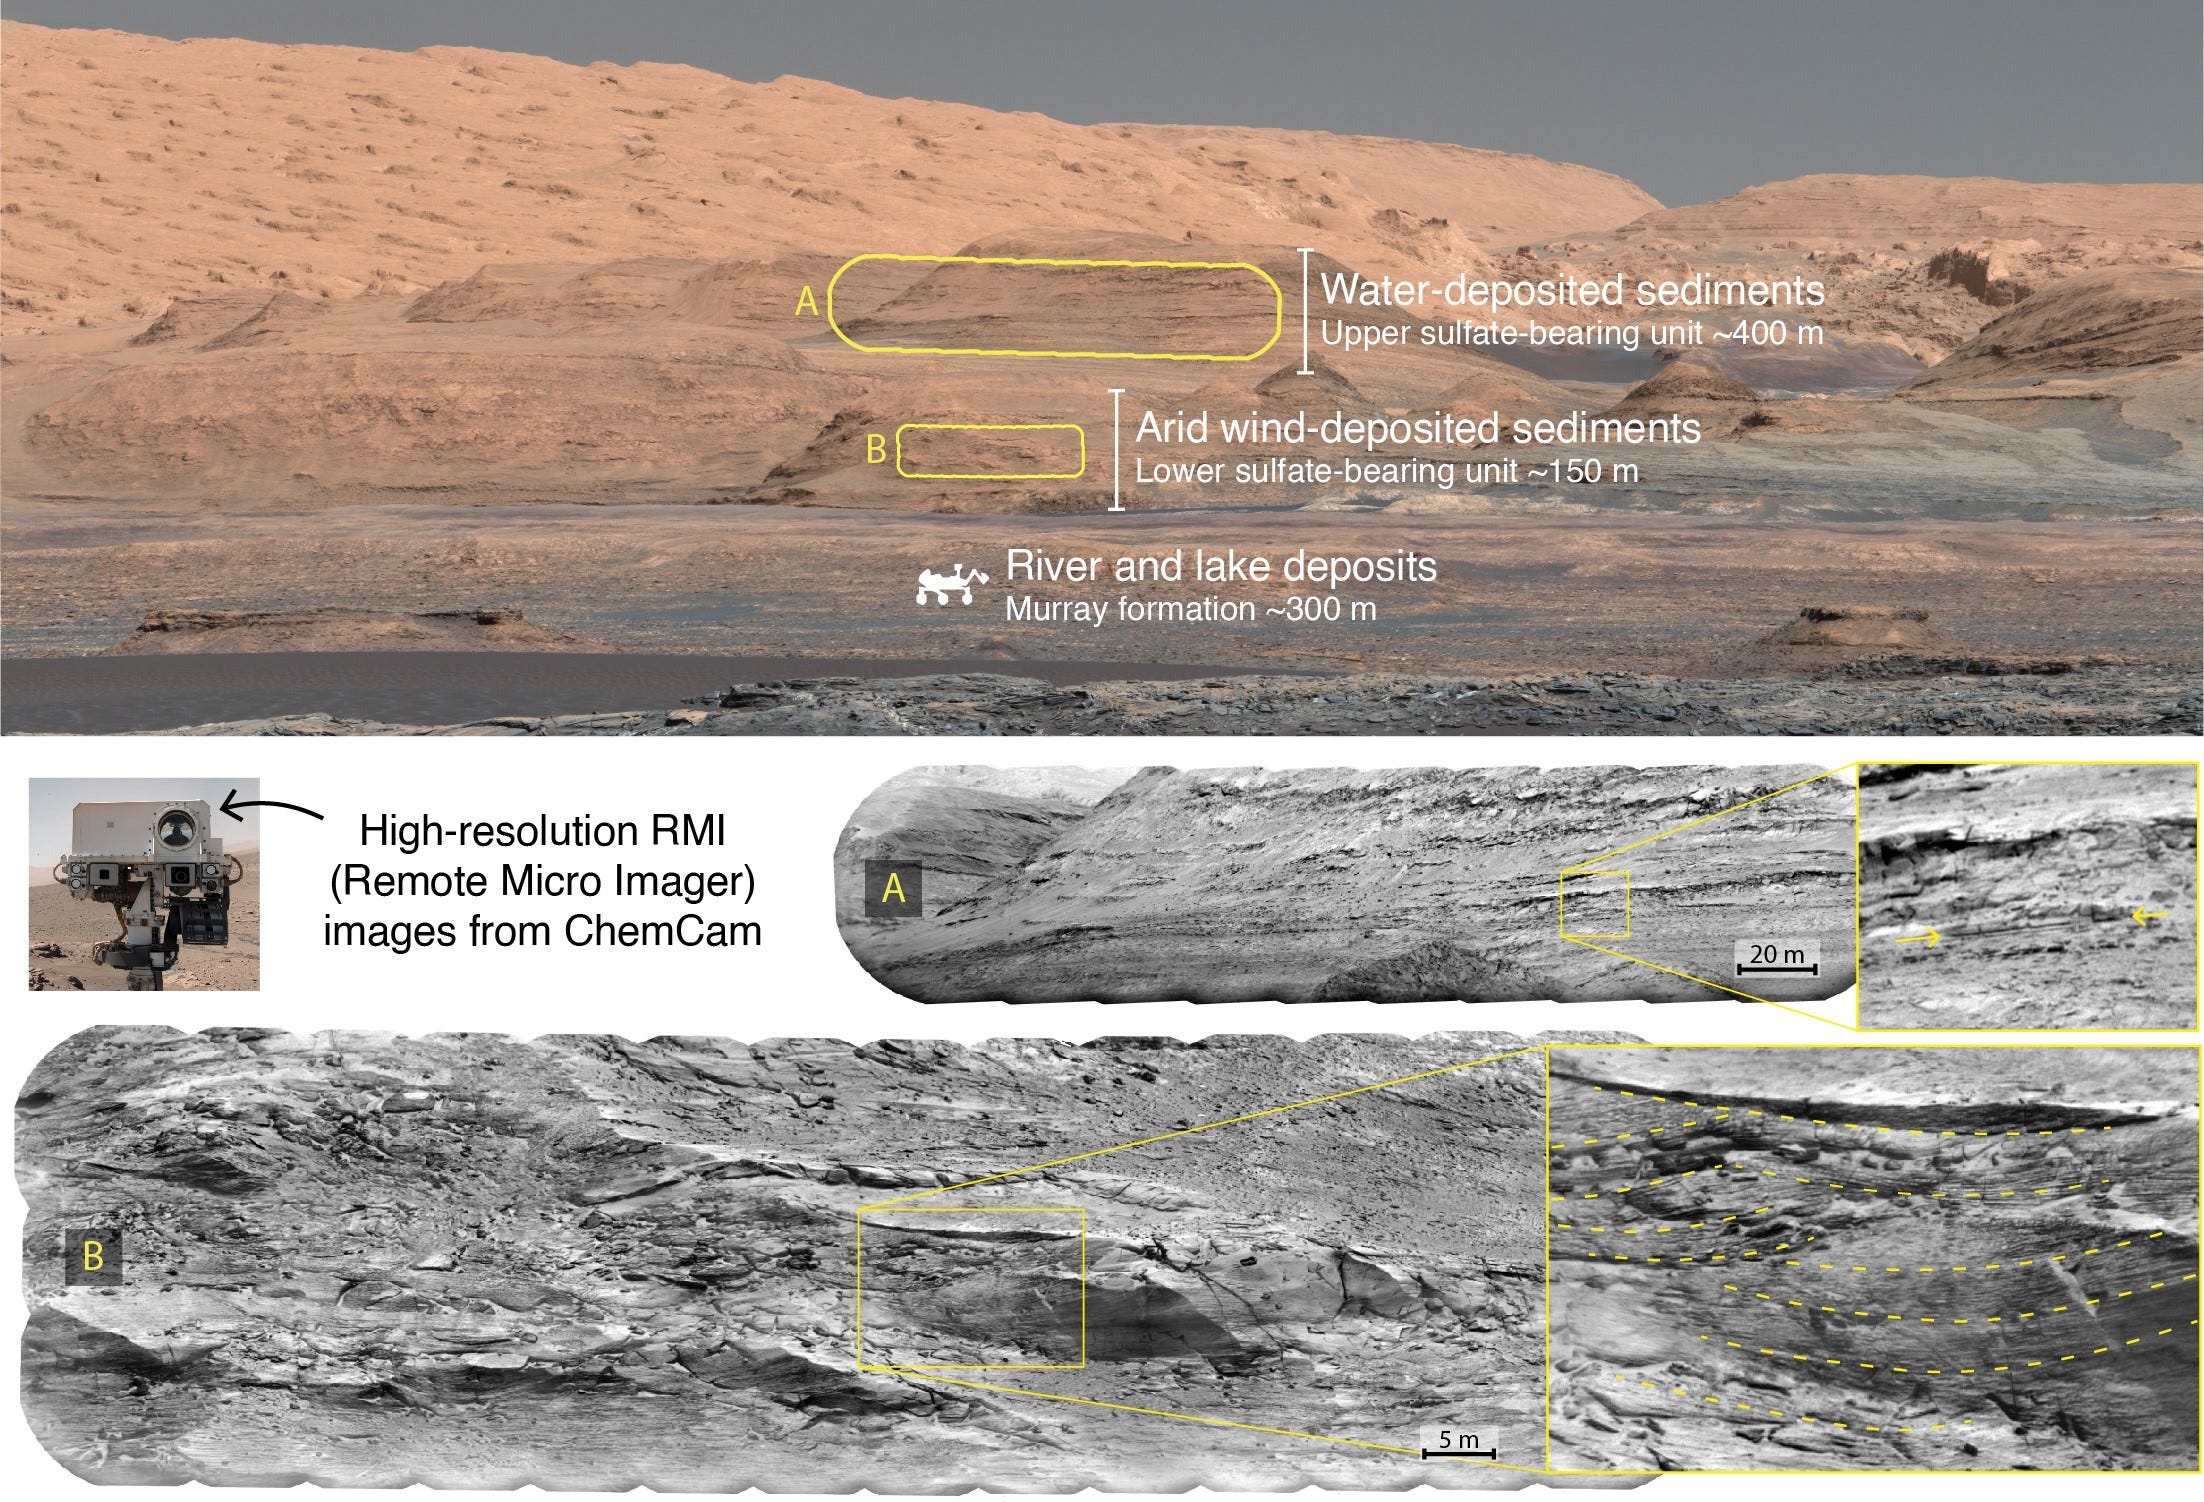 mars water history stratigraphy rock layers wet dry